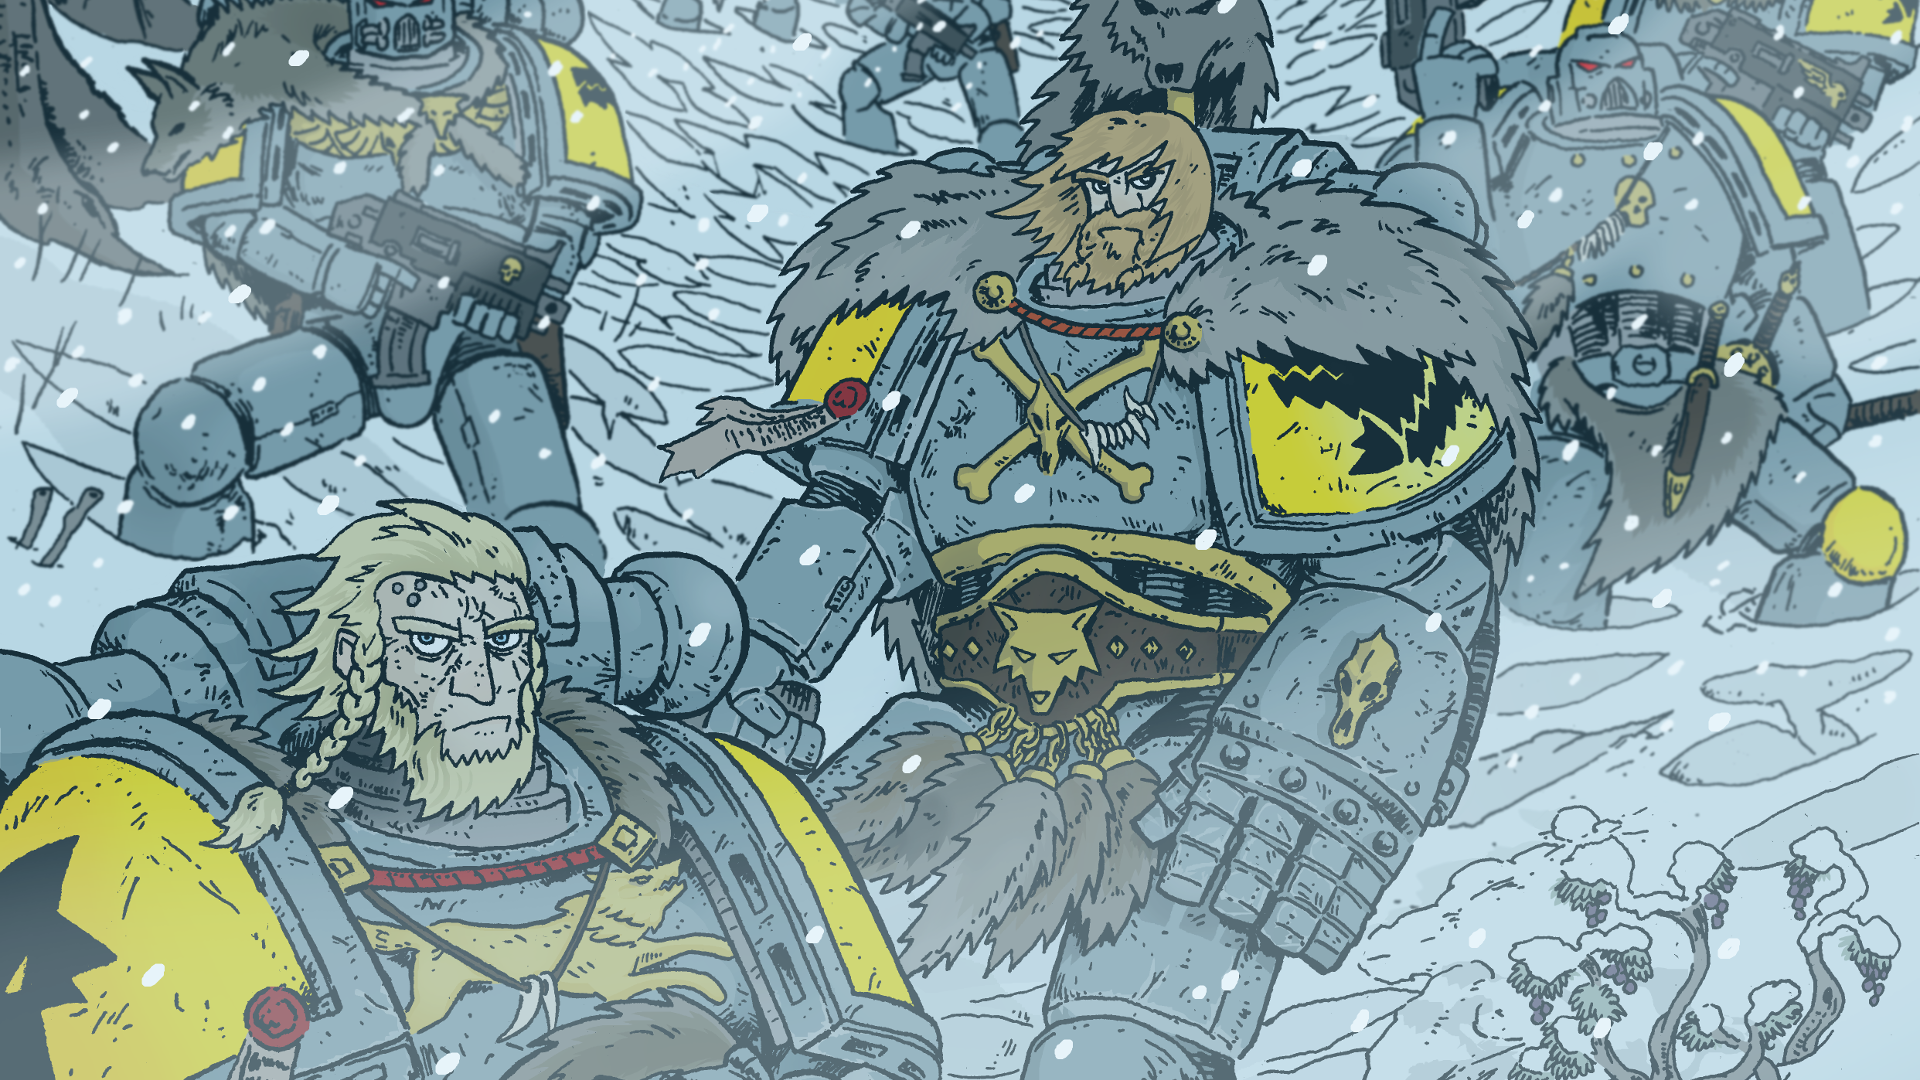 Space Wolves Wallpapers